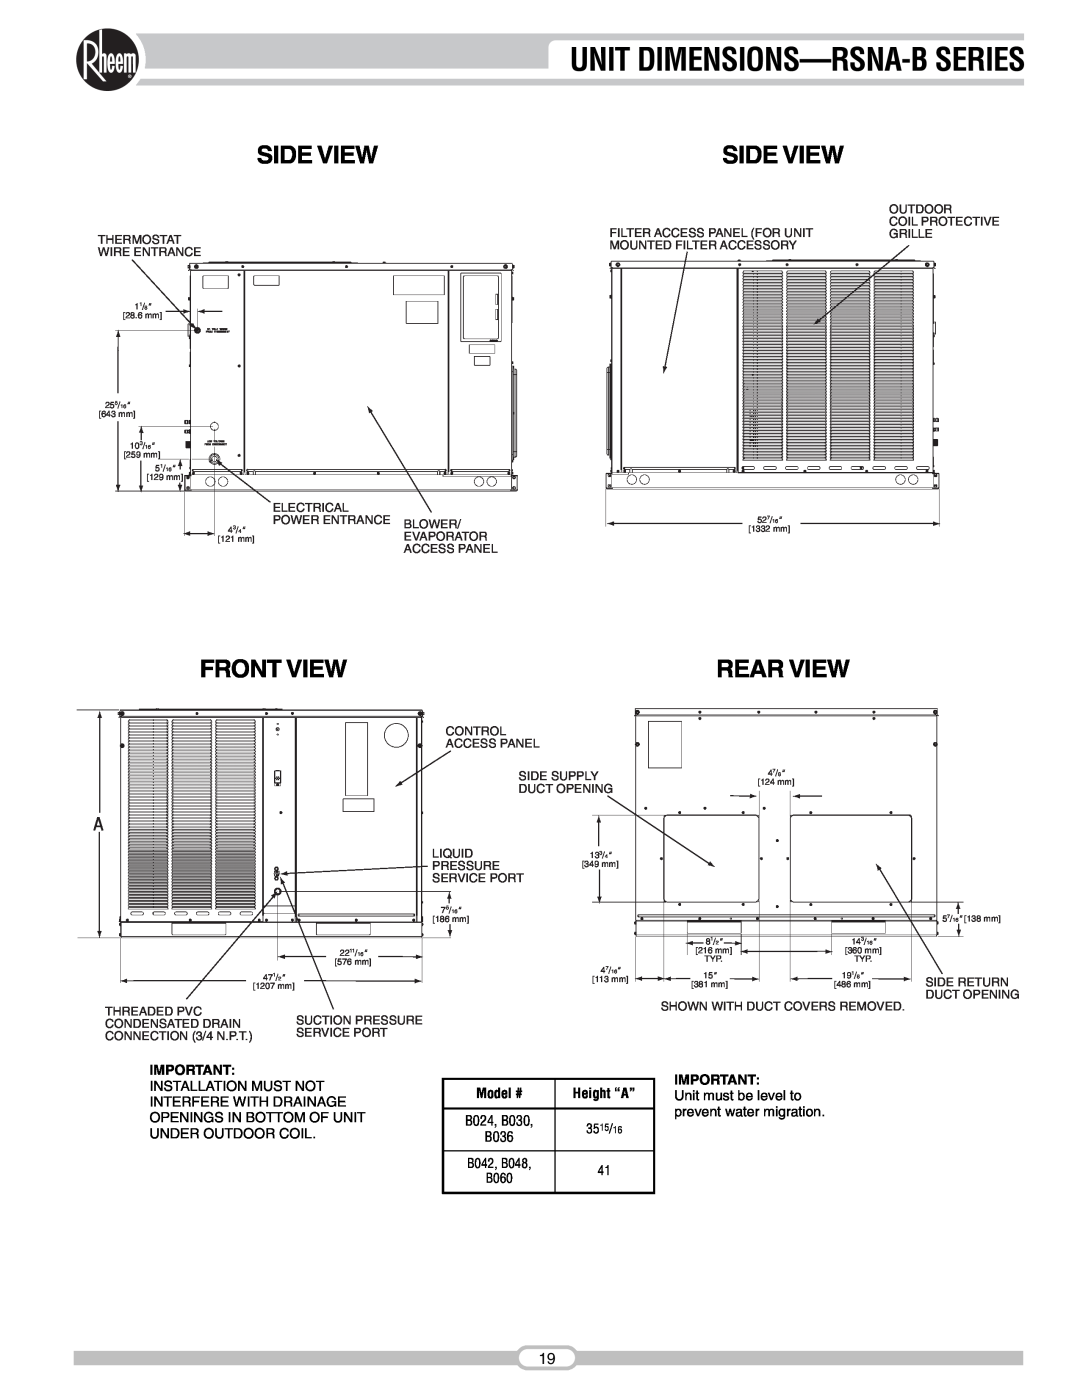 Rheem RSNA-B Series manual Unit Dimensions-Rsna-Bseries, Side View, Front View, Rear View 